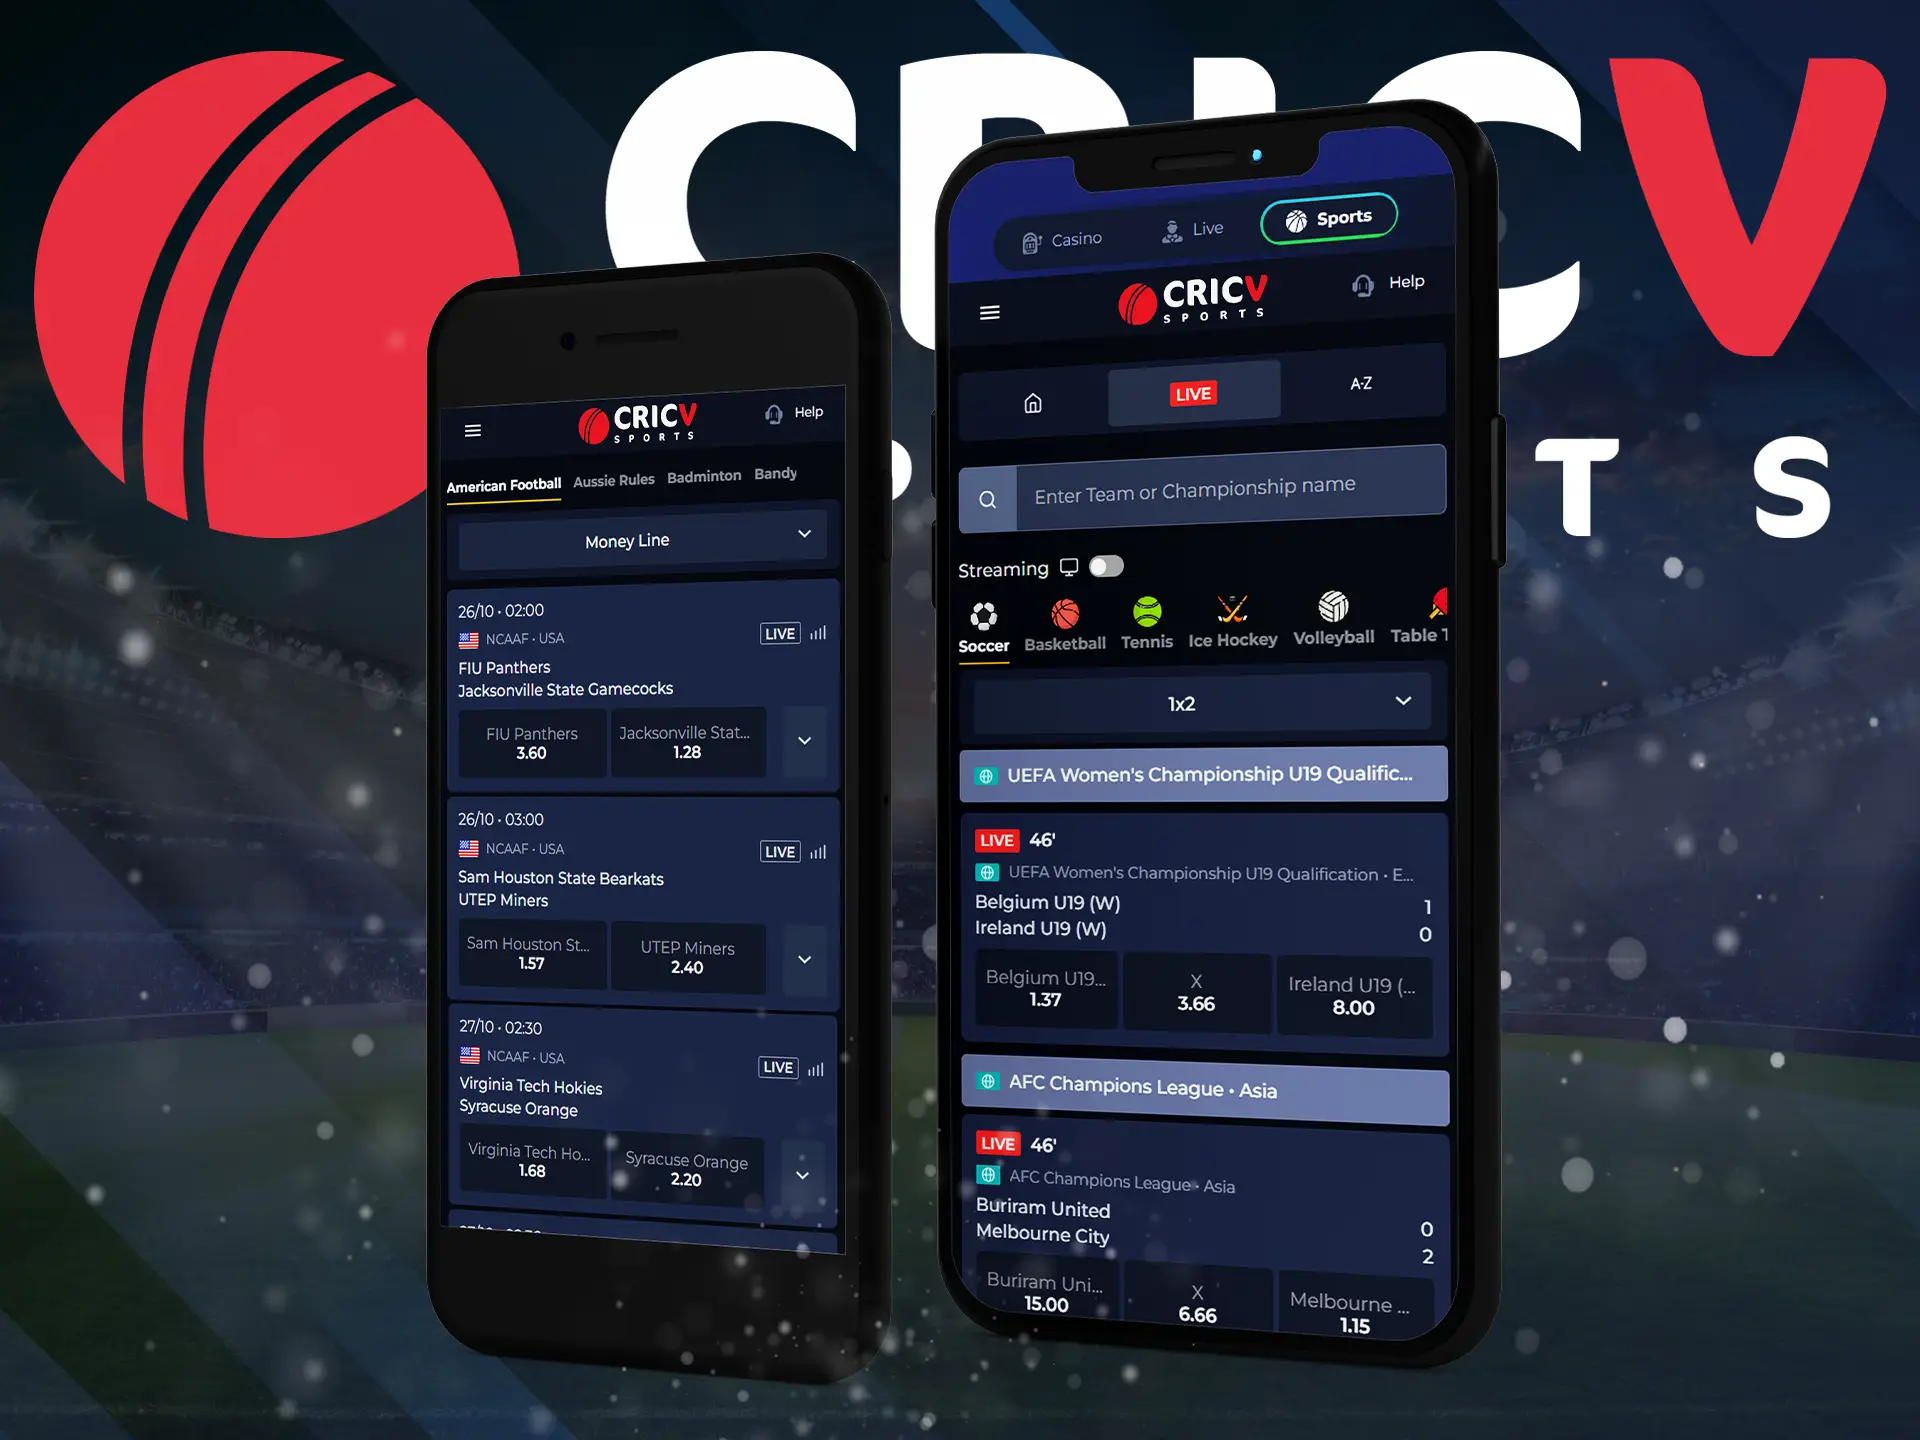 On the CricV app, users can place pre-match bets, live bets and virtual sports bets.